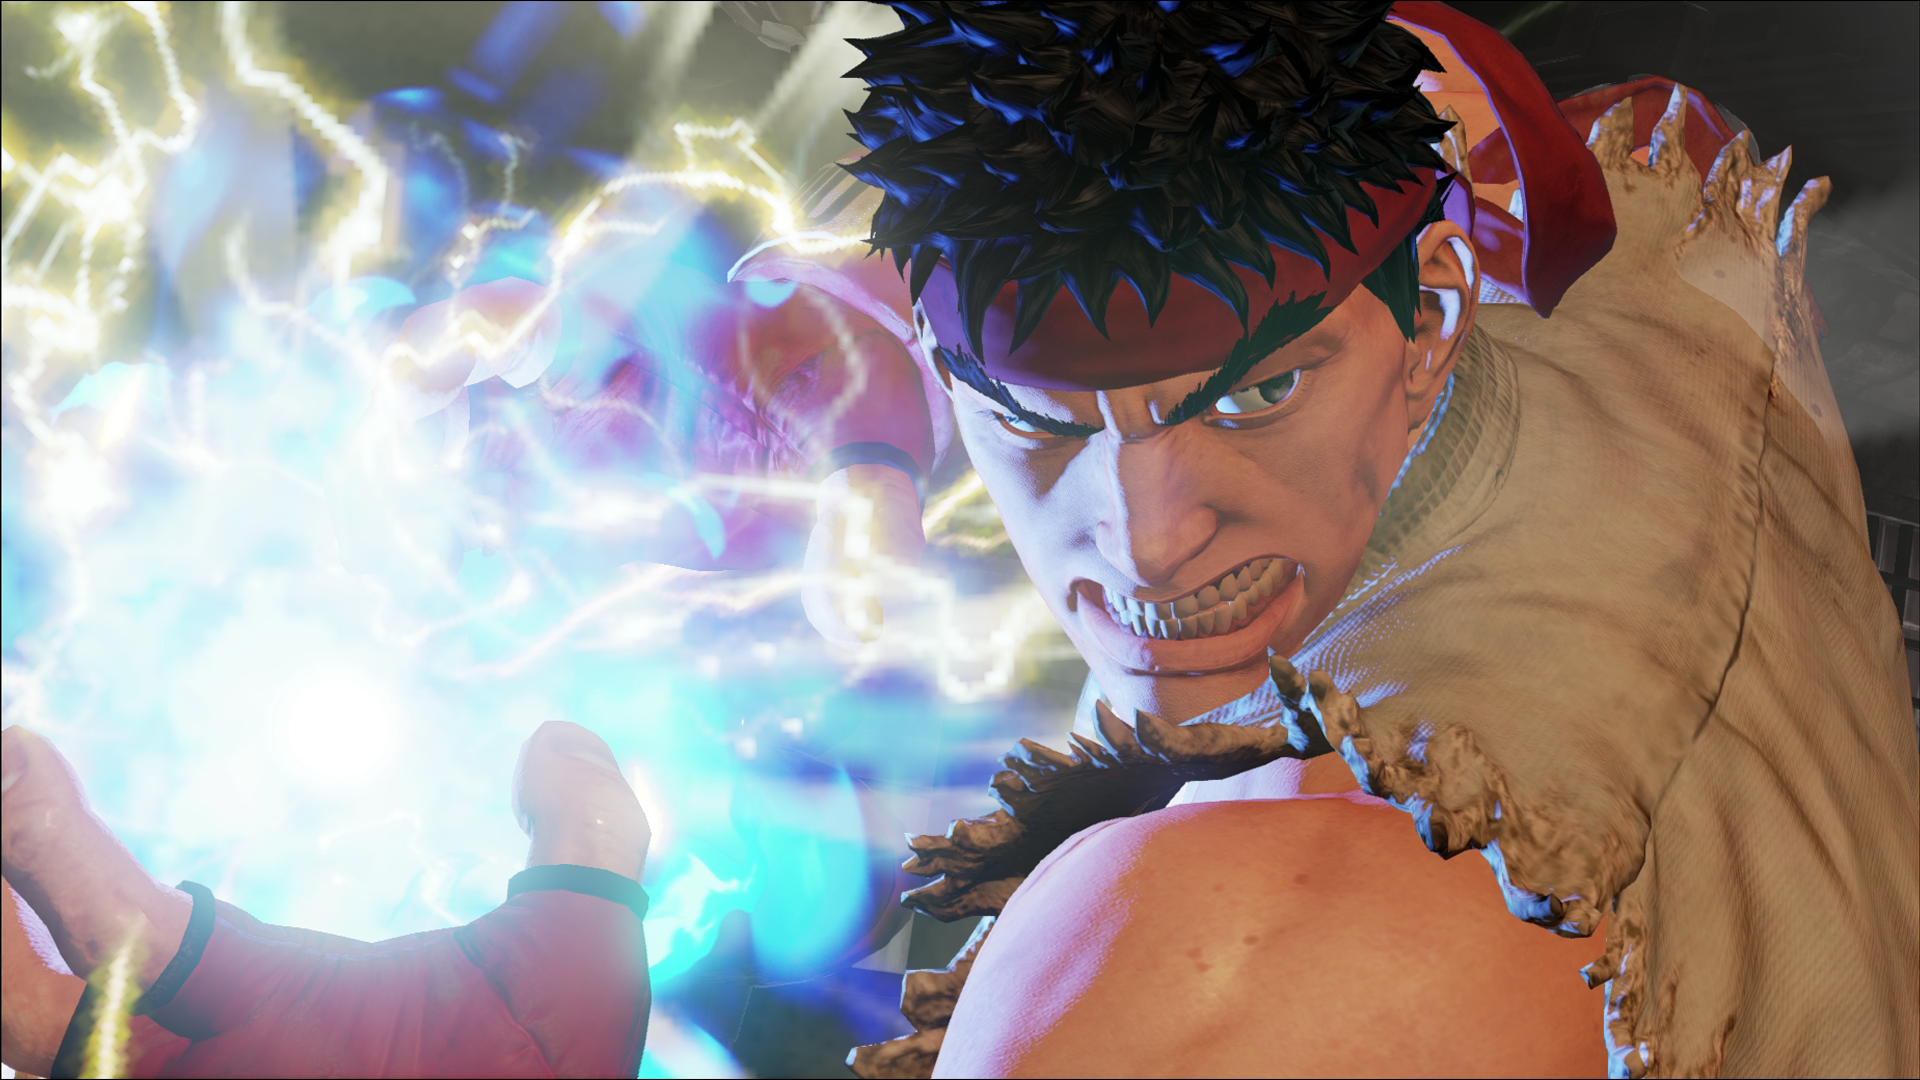 Xbox Will Never Get a Version of Street Fighter 5, Says Capcom Rep -  GameSpot